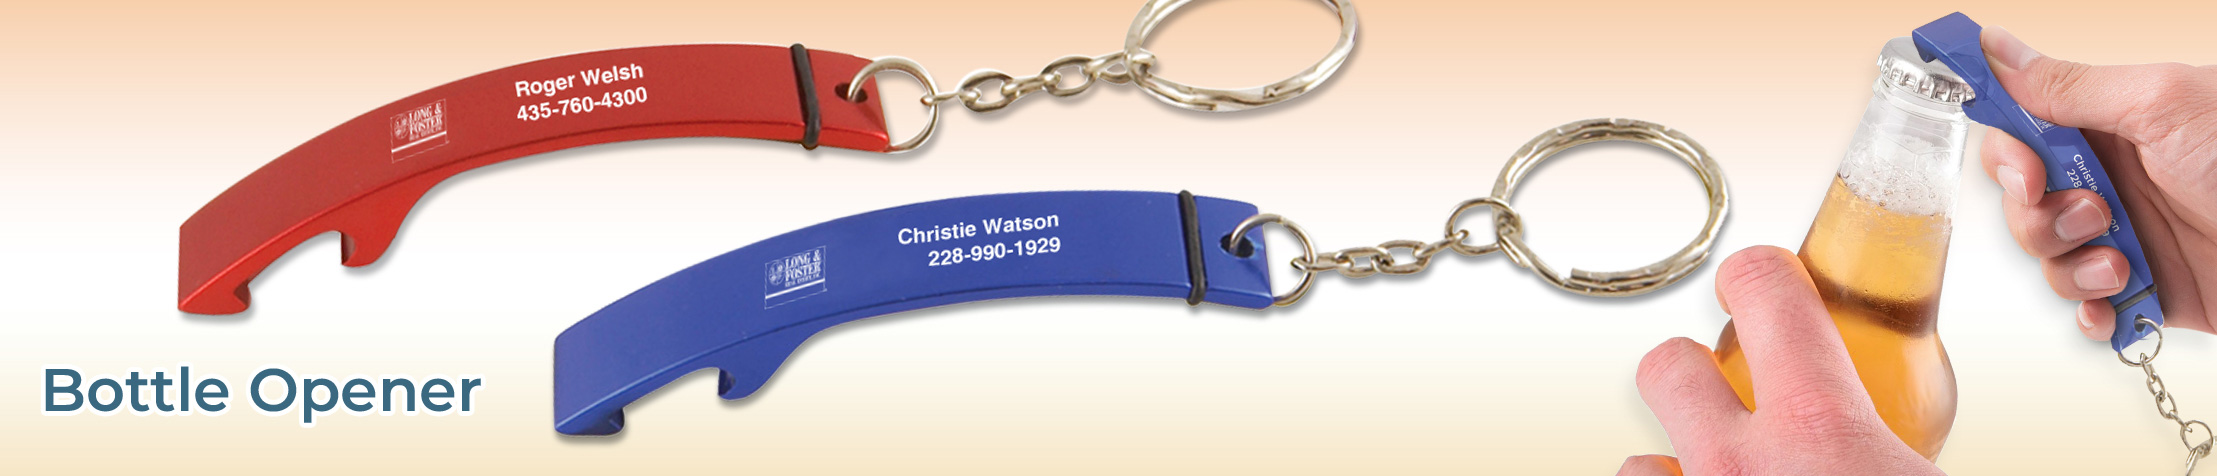 Long and Foster Real Estate Bottle Opener - Long and Foster personalized realtor promotional products | BestPrintBuy.com